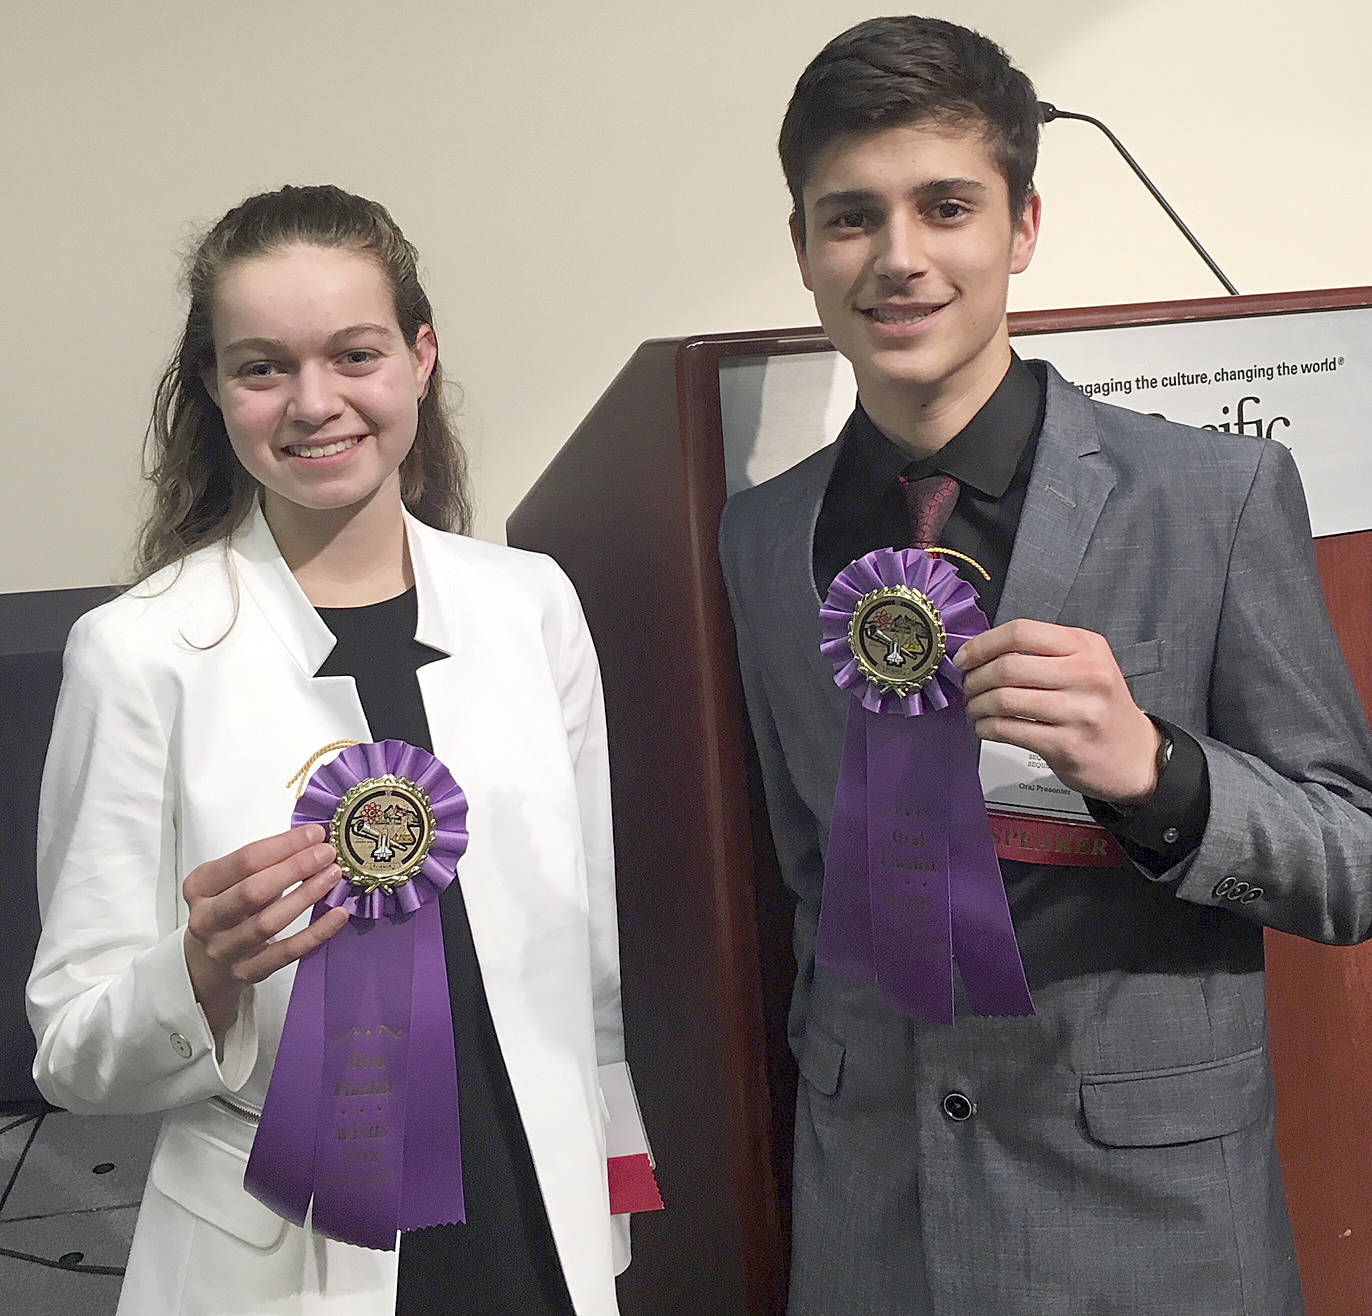 Sequim High School students Vita Olson and Sean Weber take a break from competition at the Washington Junior Science and Humanities Symposium, held in mid-March at Seattle Pacific University. Submitted photos